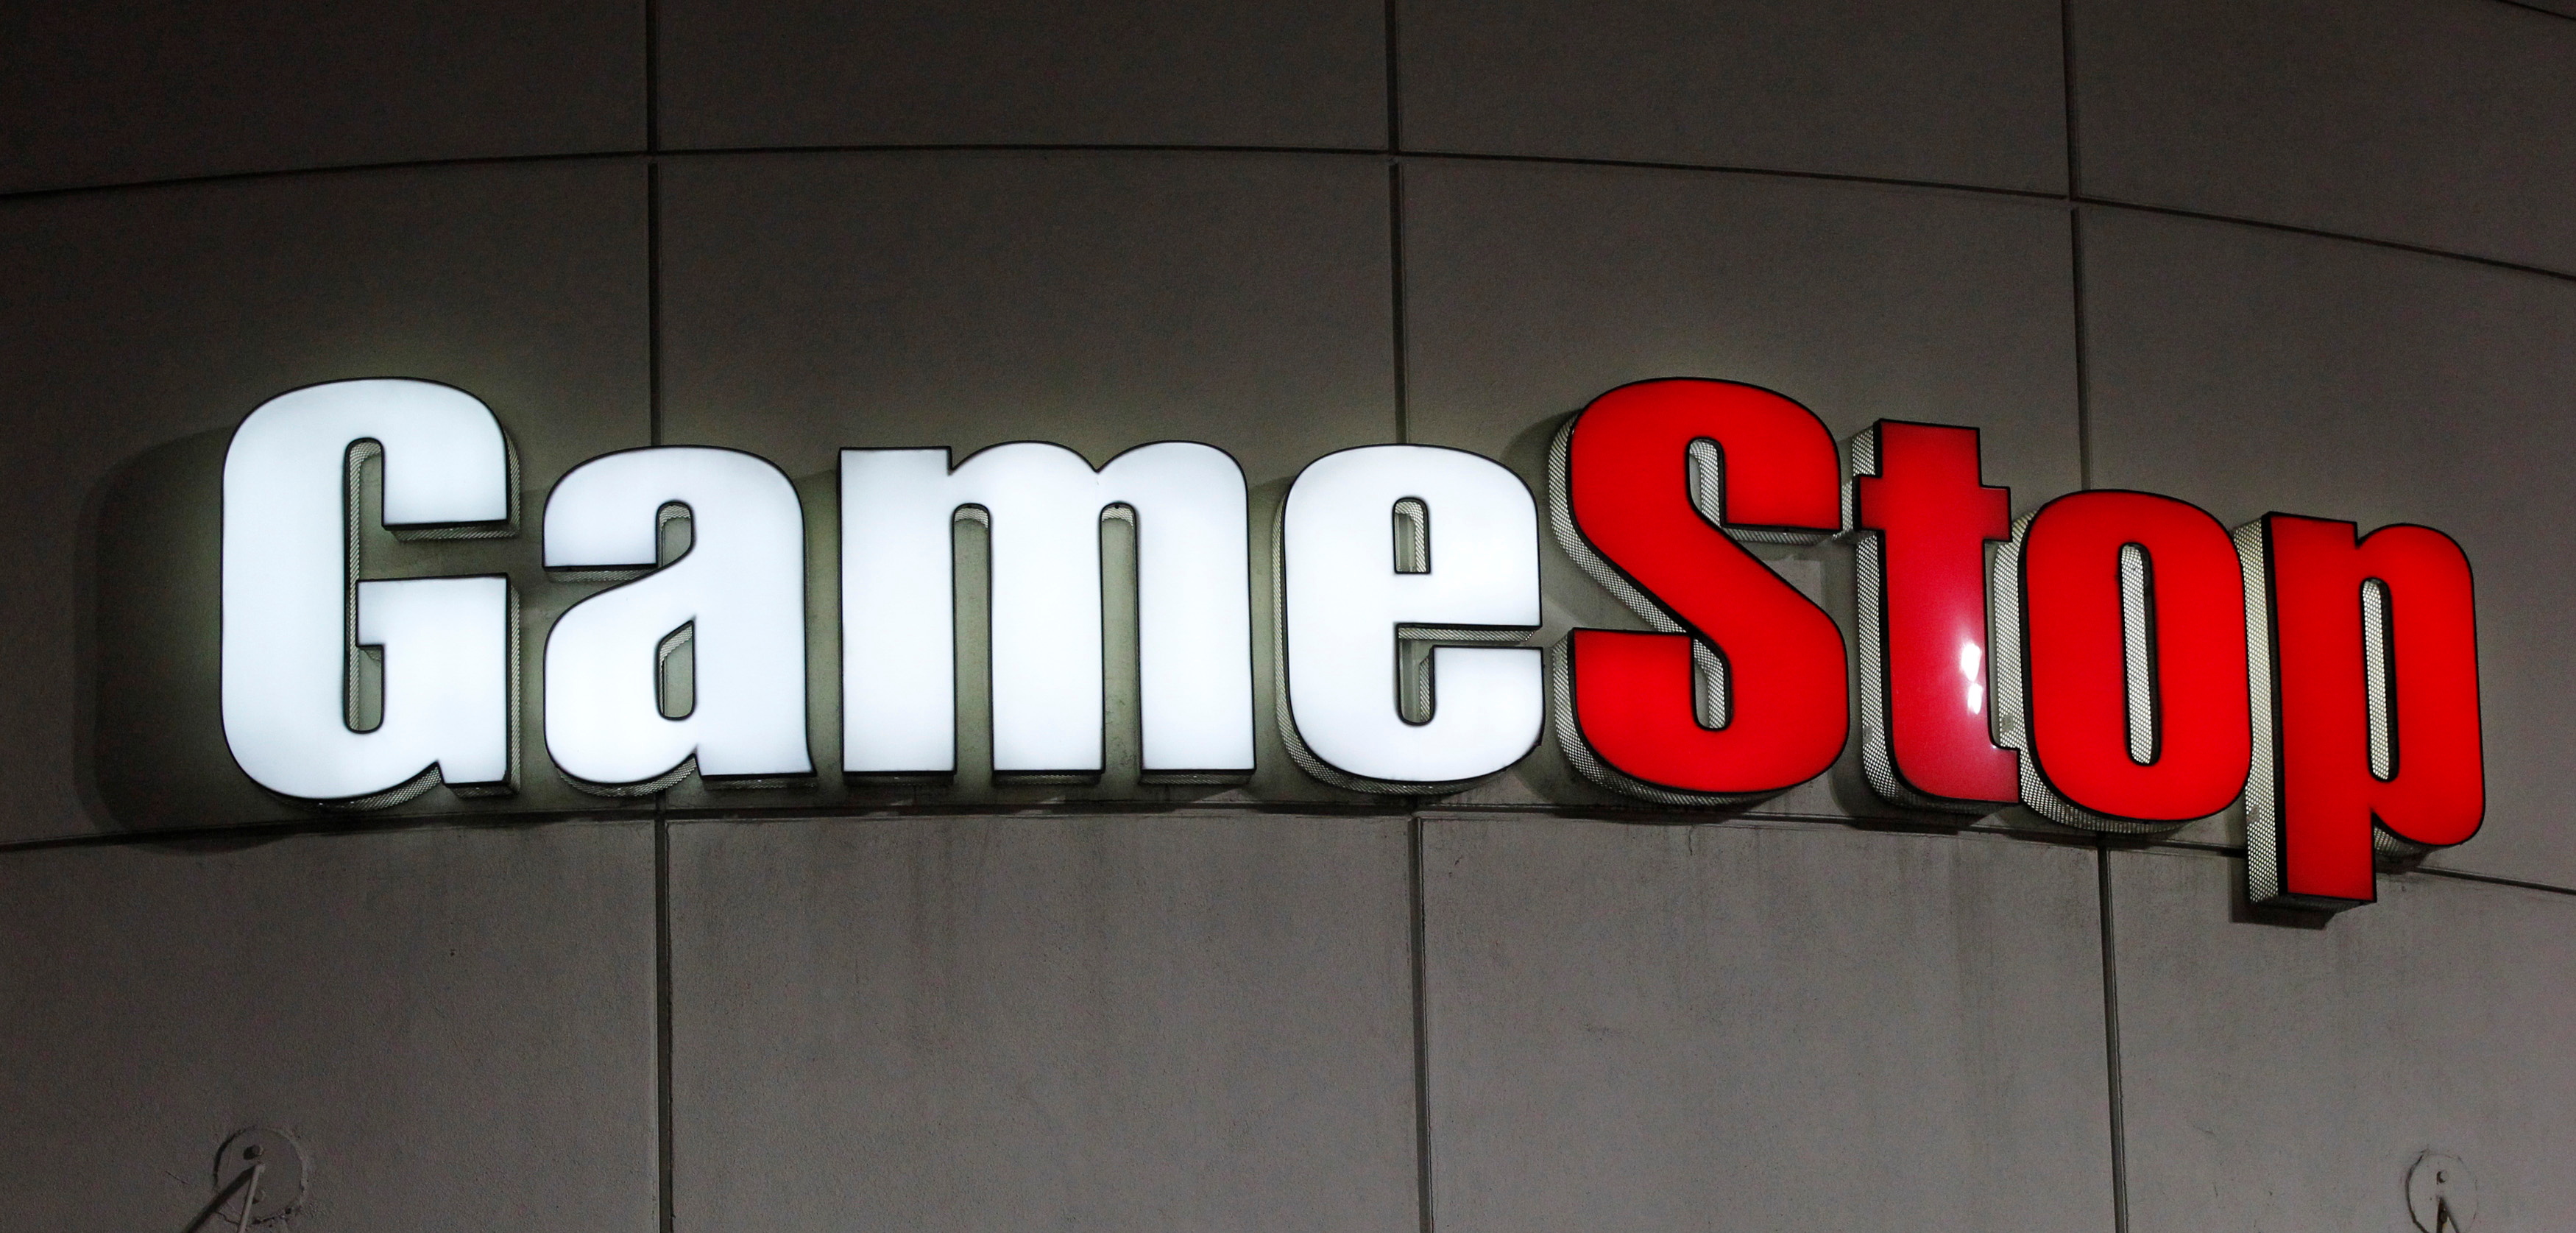 A GameStop sign is pictured in Pasadena, California March 27, 2013. REUTERS/Mario Anzuoni/File Photo